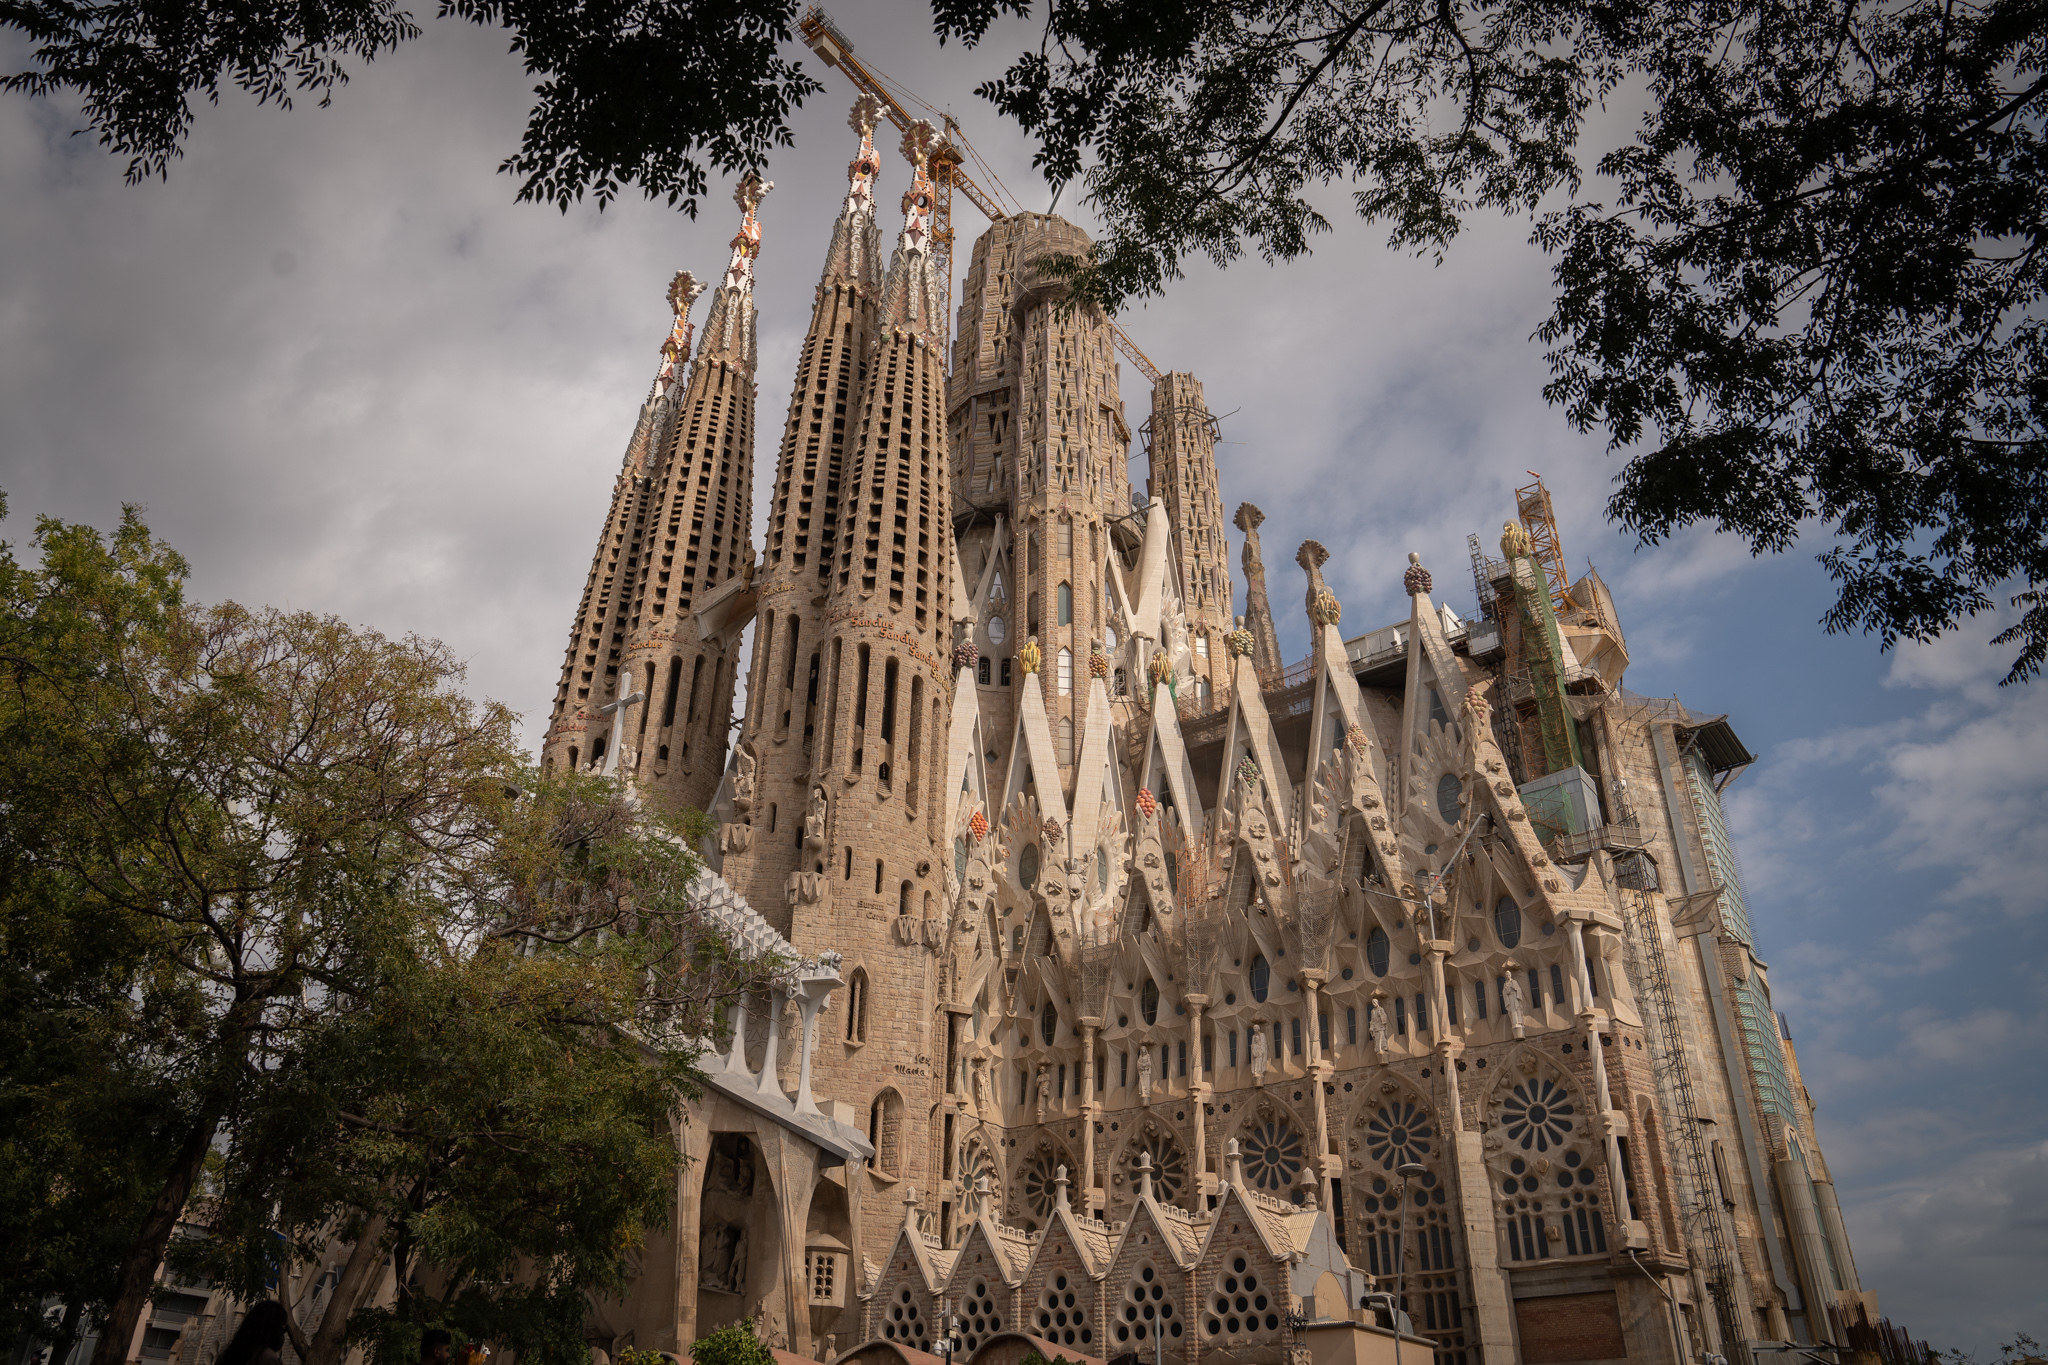 A large cathedral with steeples and spires